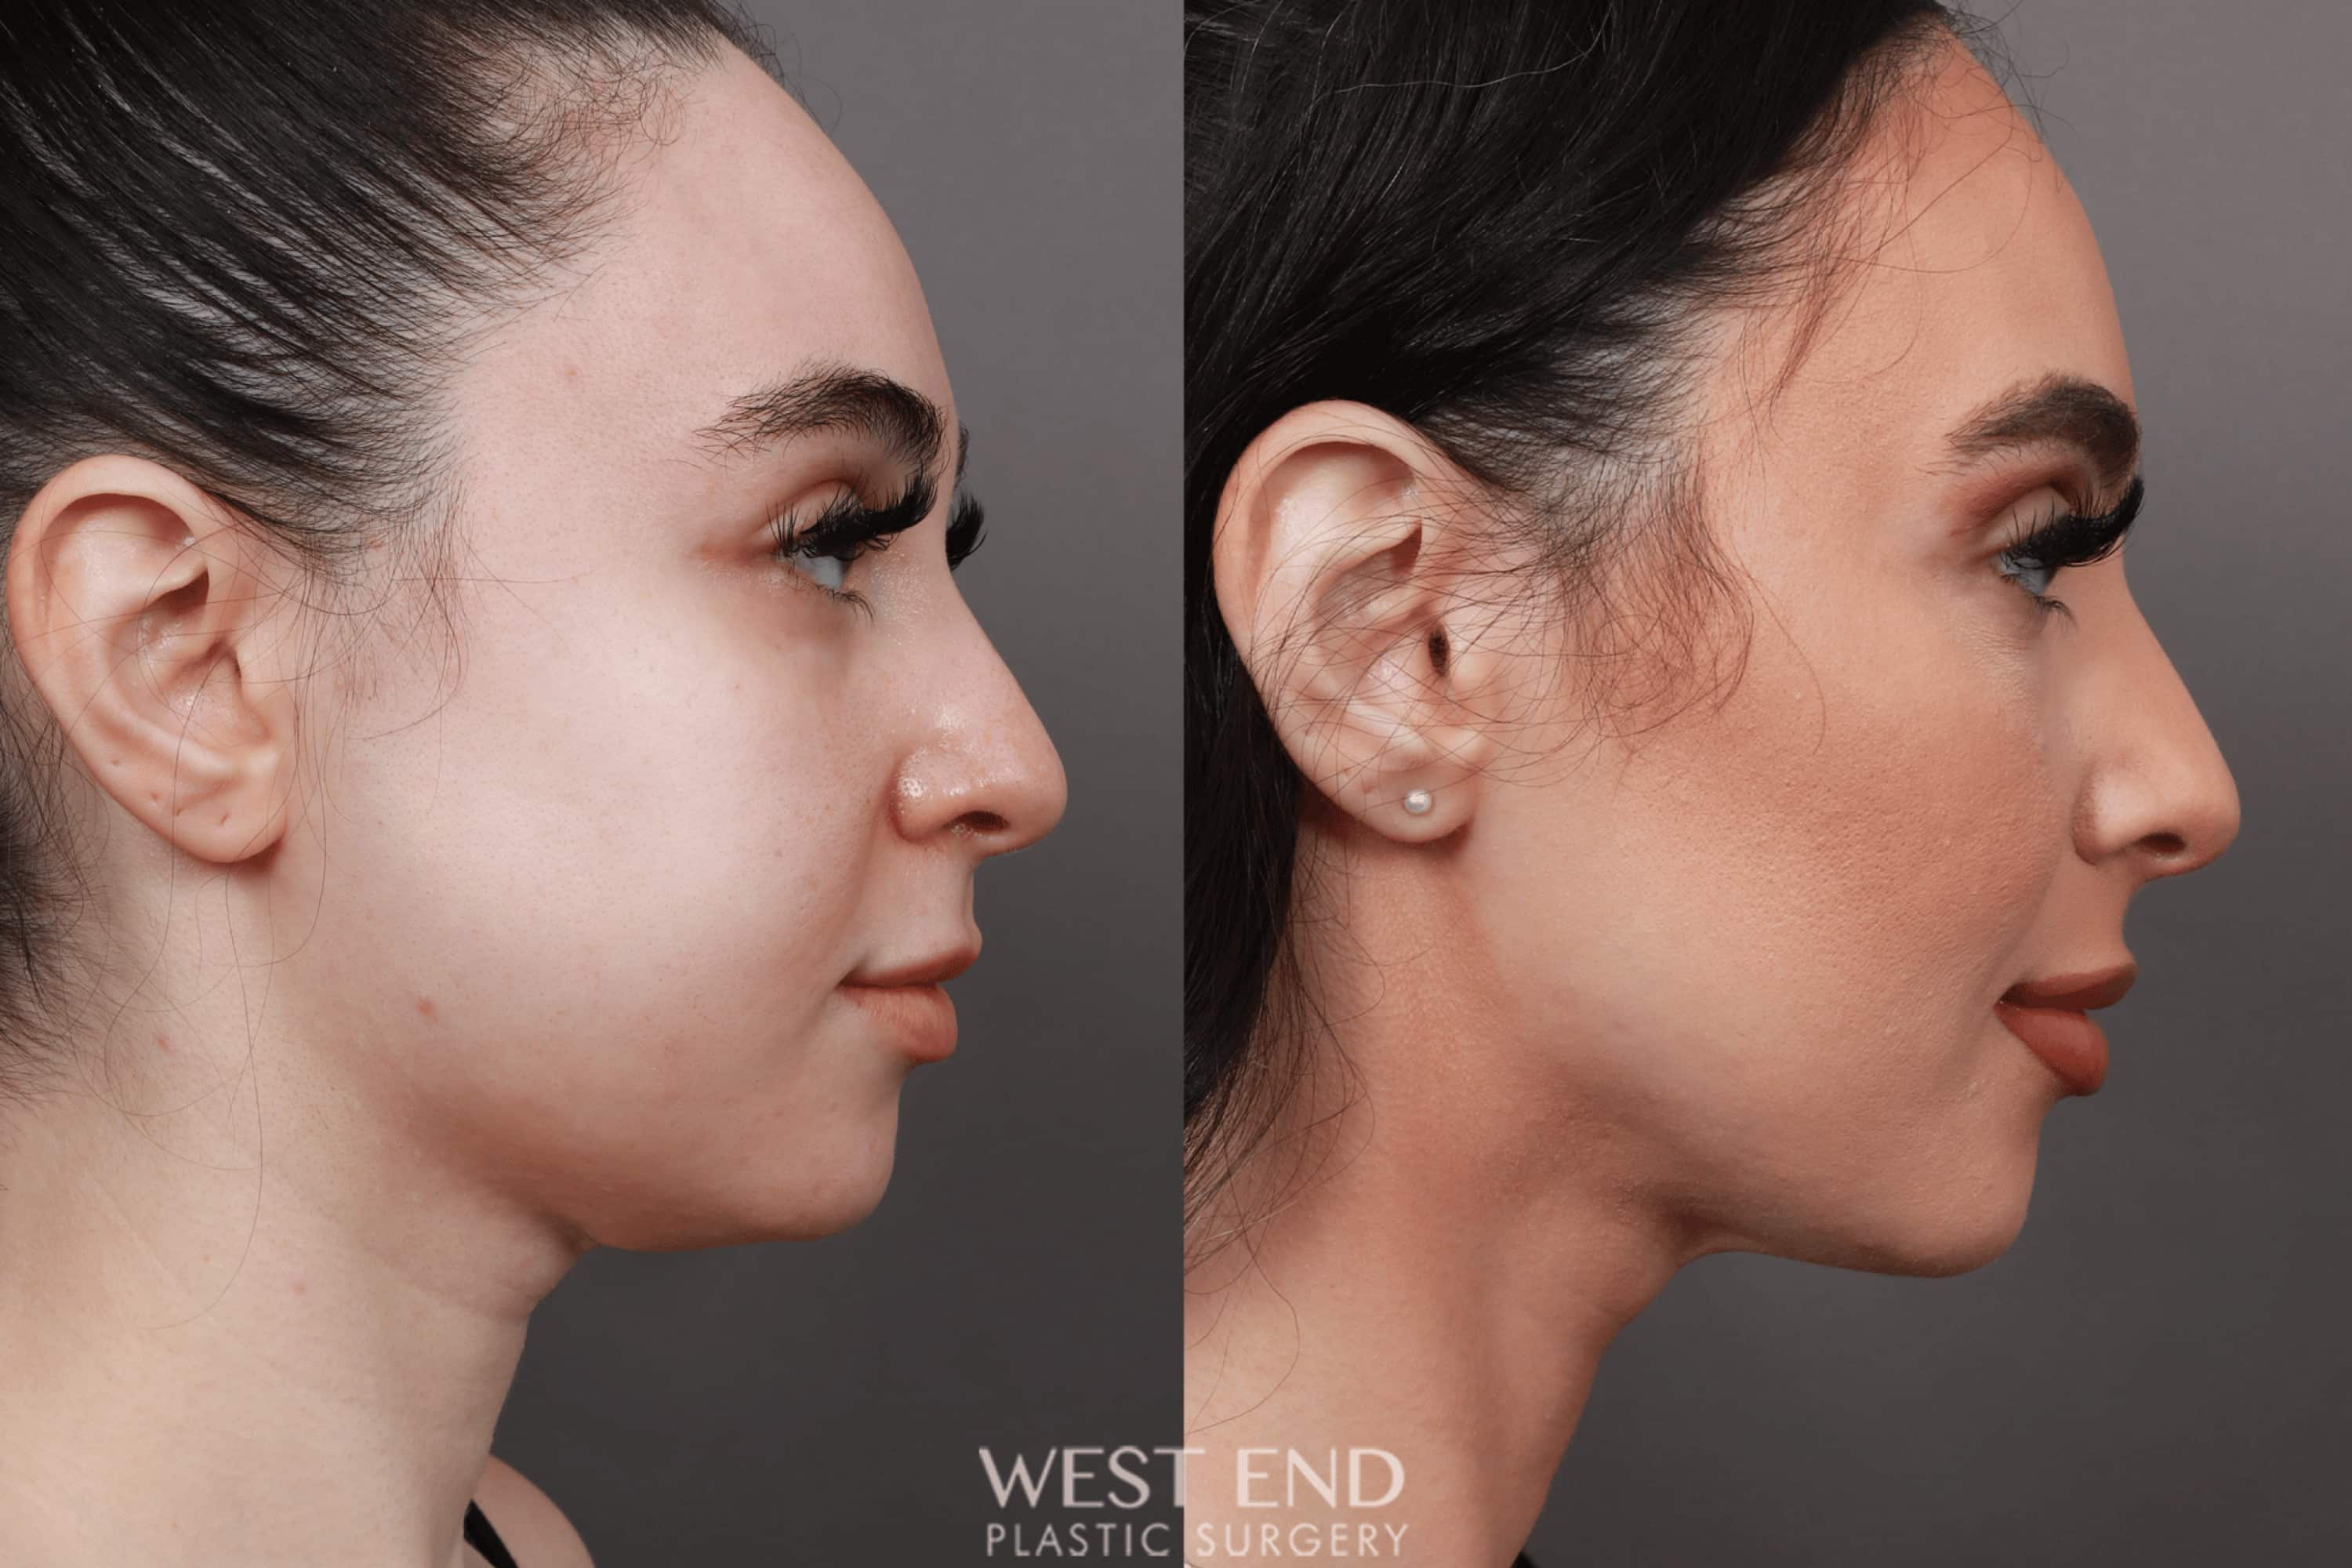 Liposuction of the Submental, Jawline, and Neck Region (5 Months Post-Op)